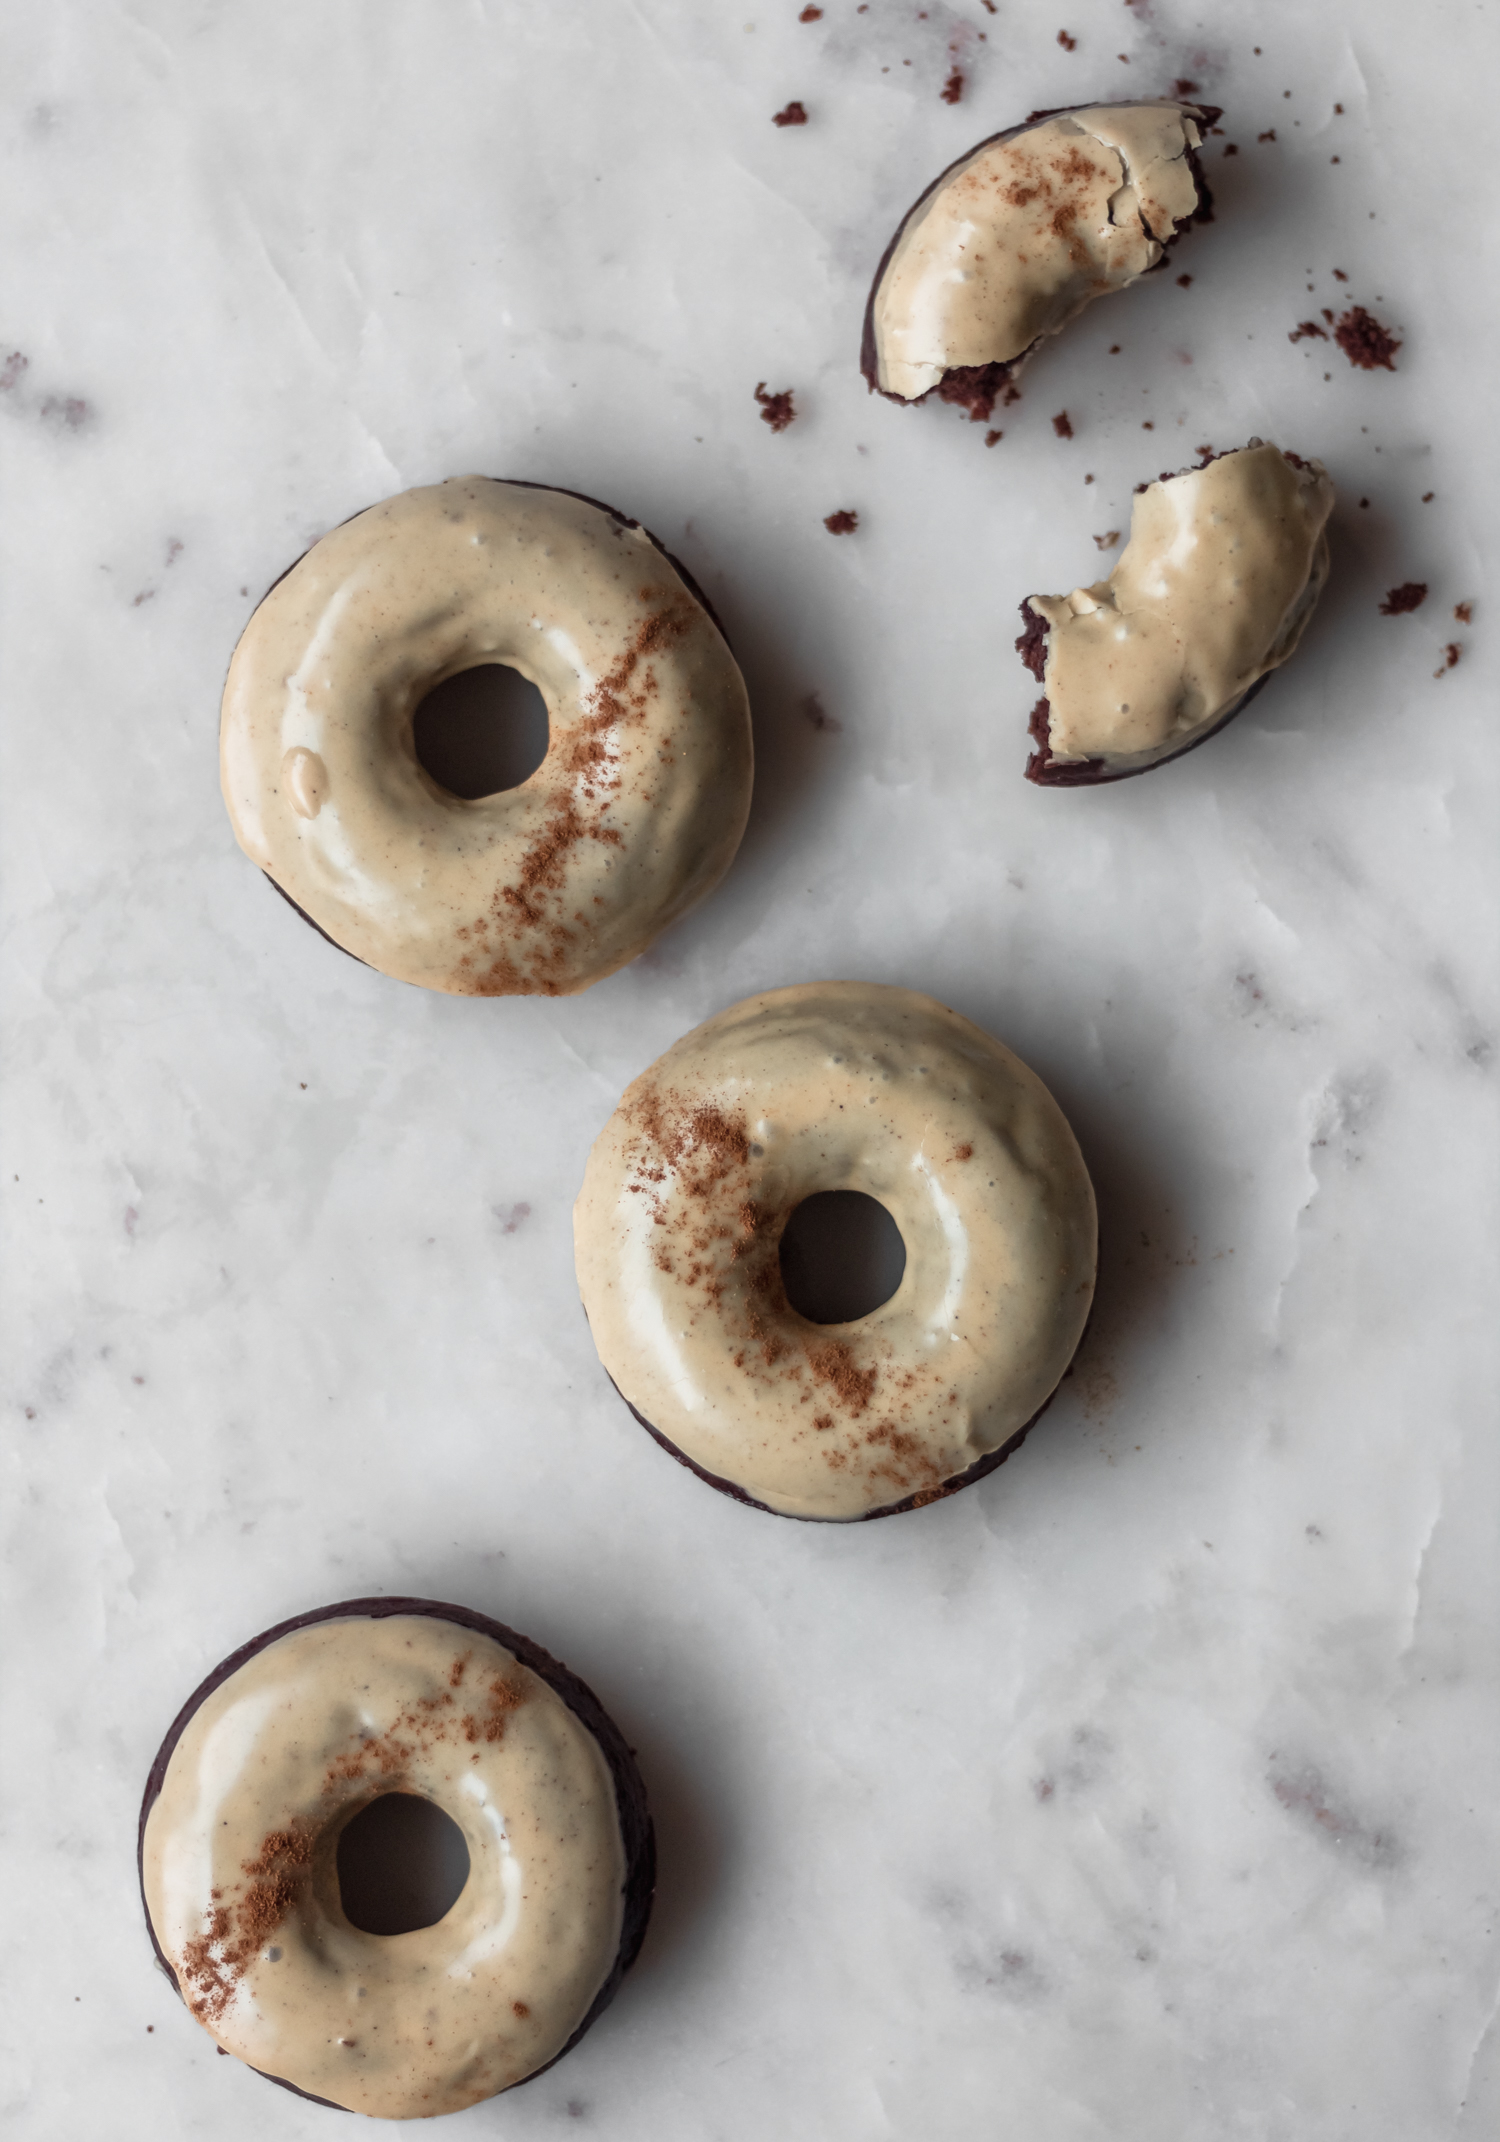 How to make chocolate donuts.